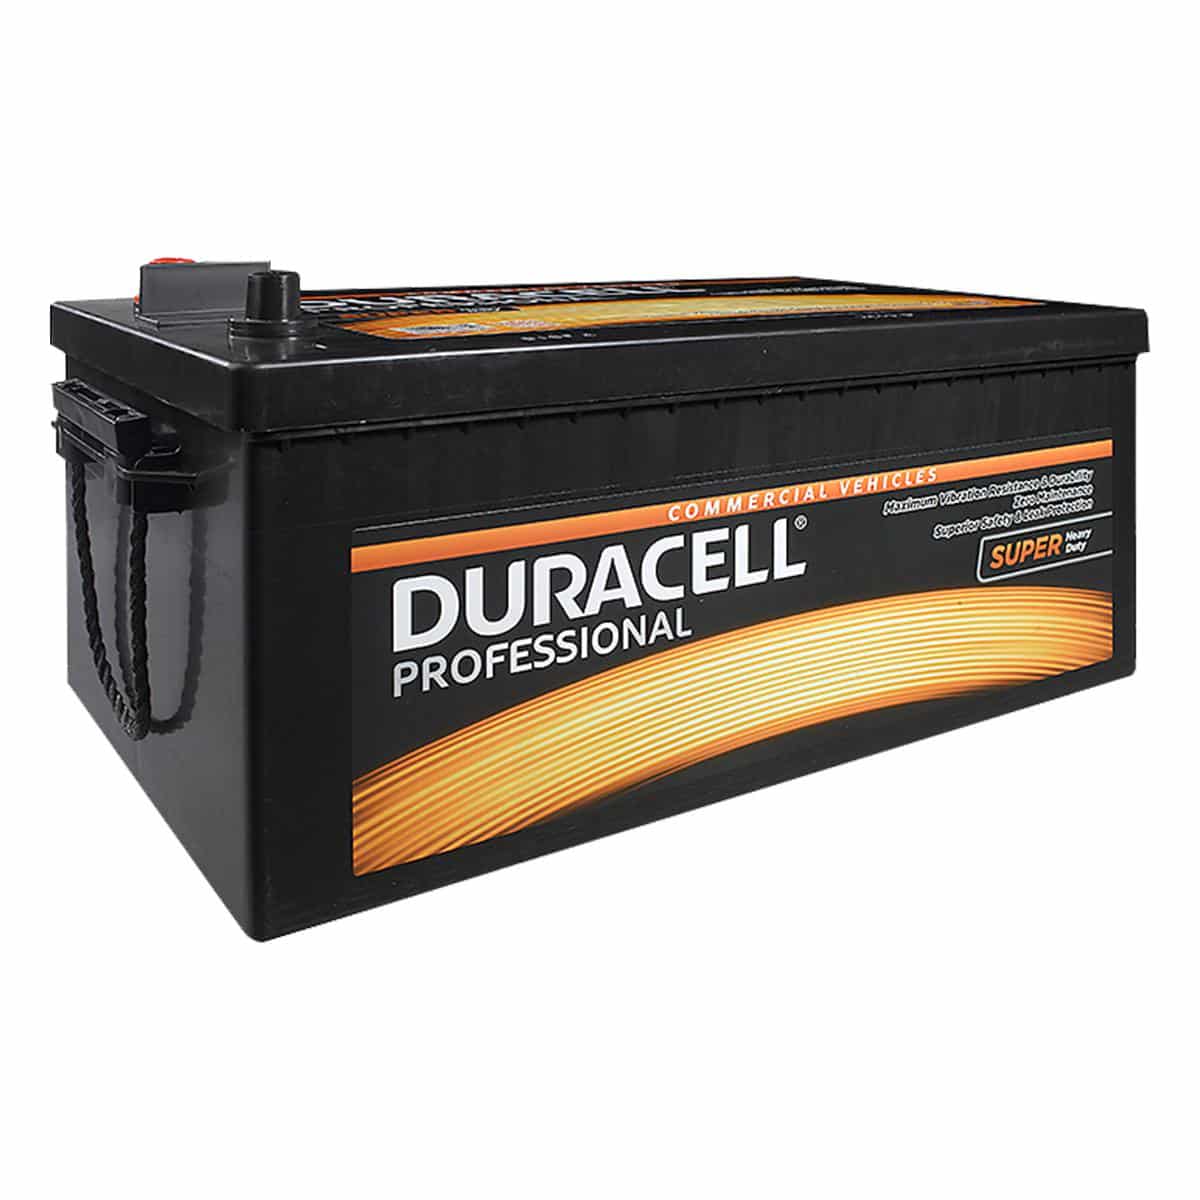 Duracell 632SHD / DP225SHD Professional Commercial Vehicle Battery ...